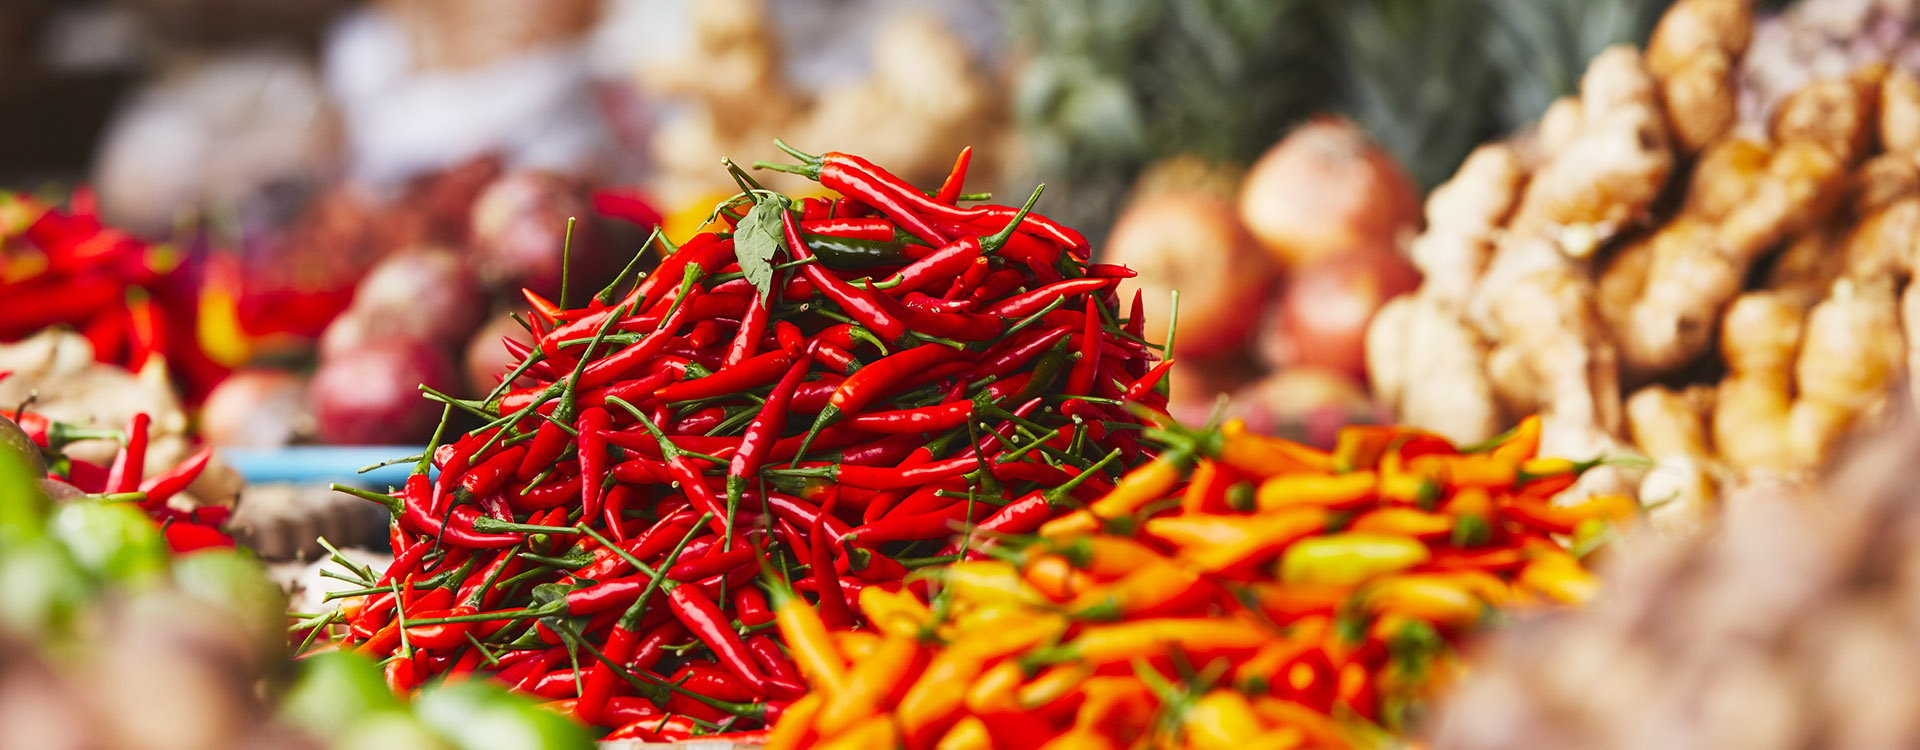 Red chili on the traditional vegetable market in Hanoi, Vietnam